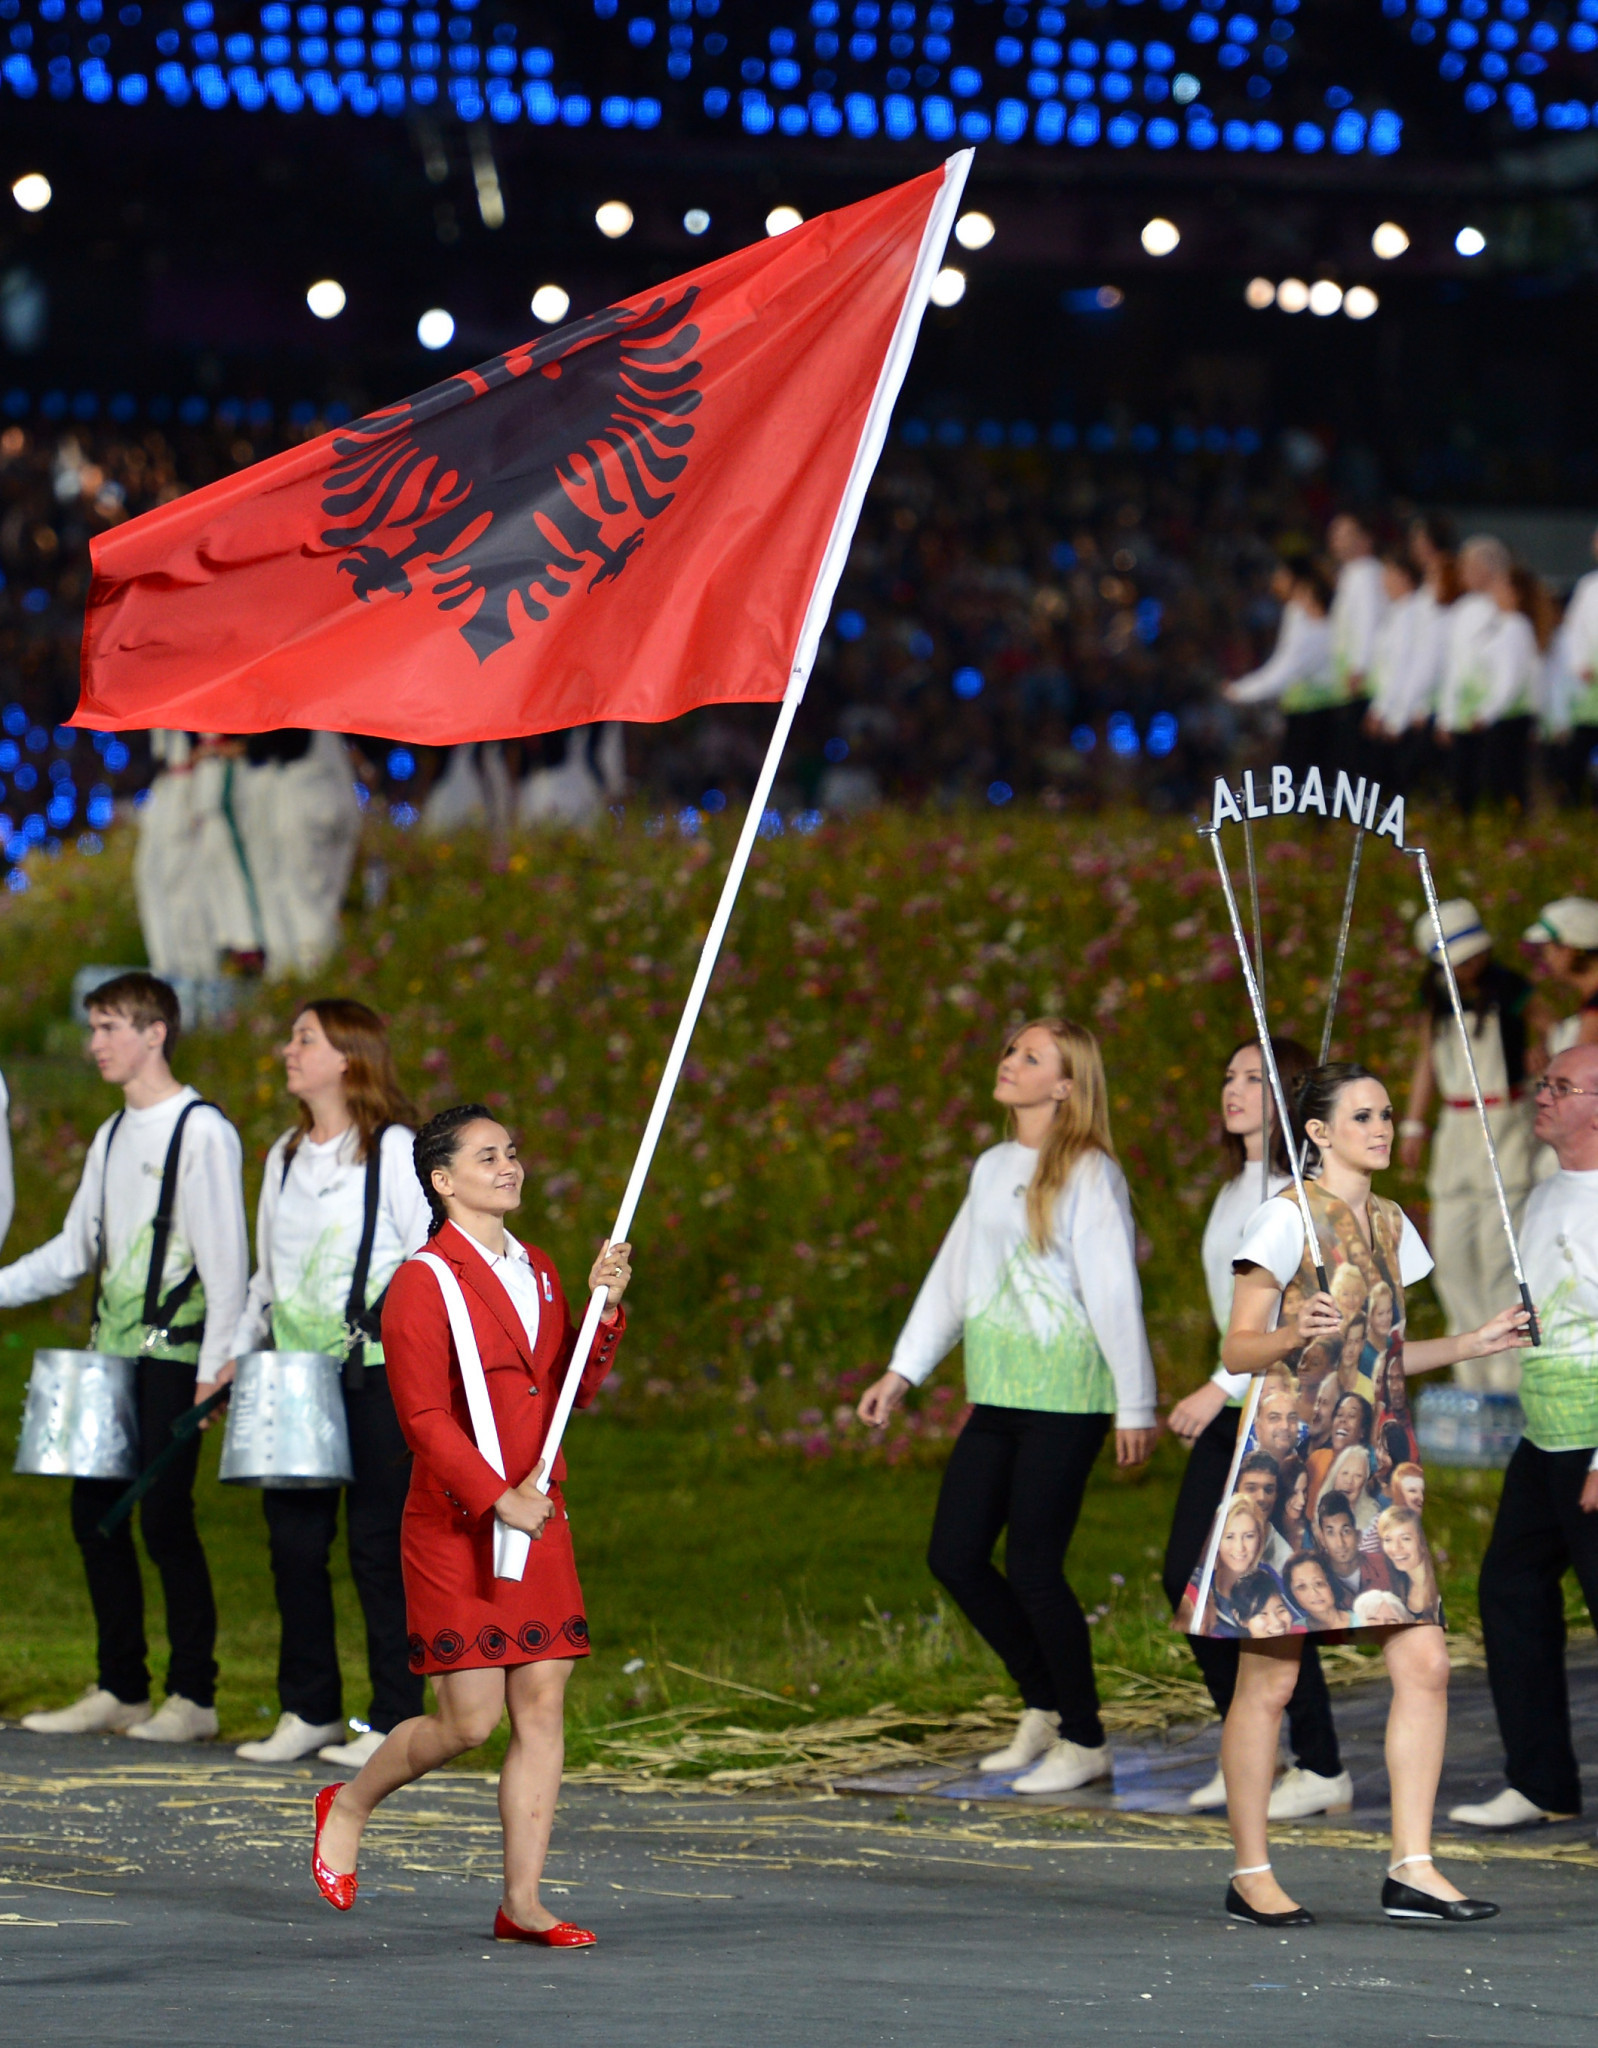 Romela Begaj had carried Albania's flag at the Opening Ceremony of London 2012 ©Getty Images